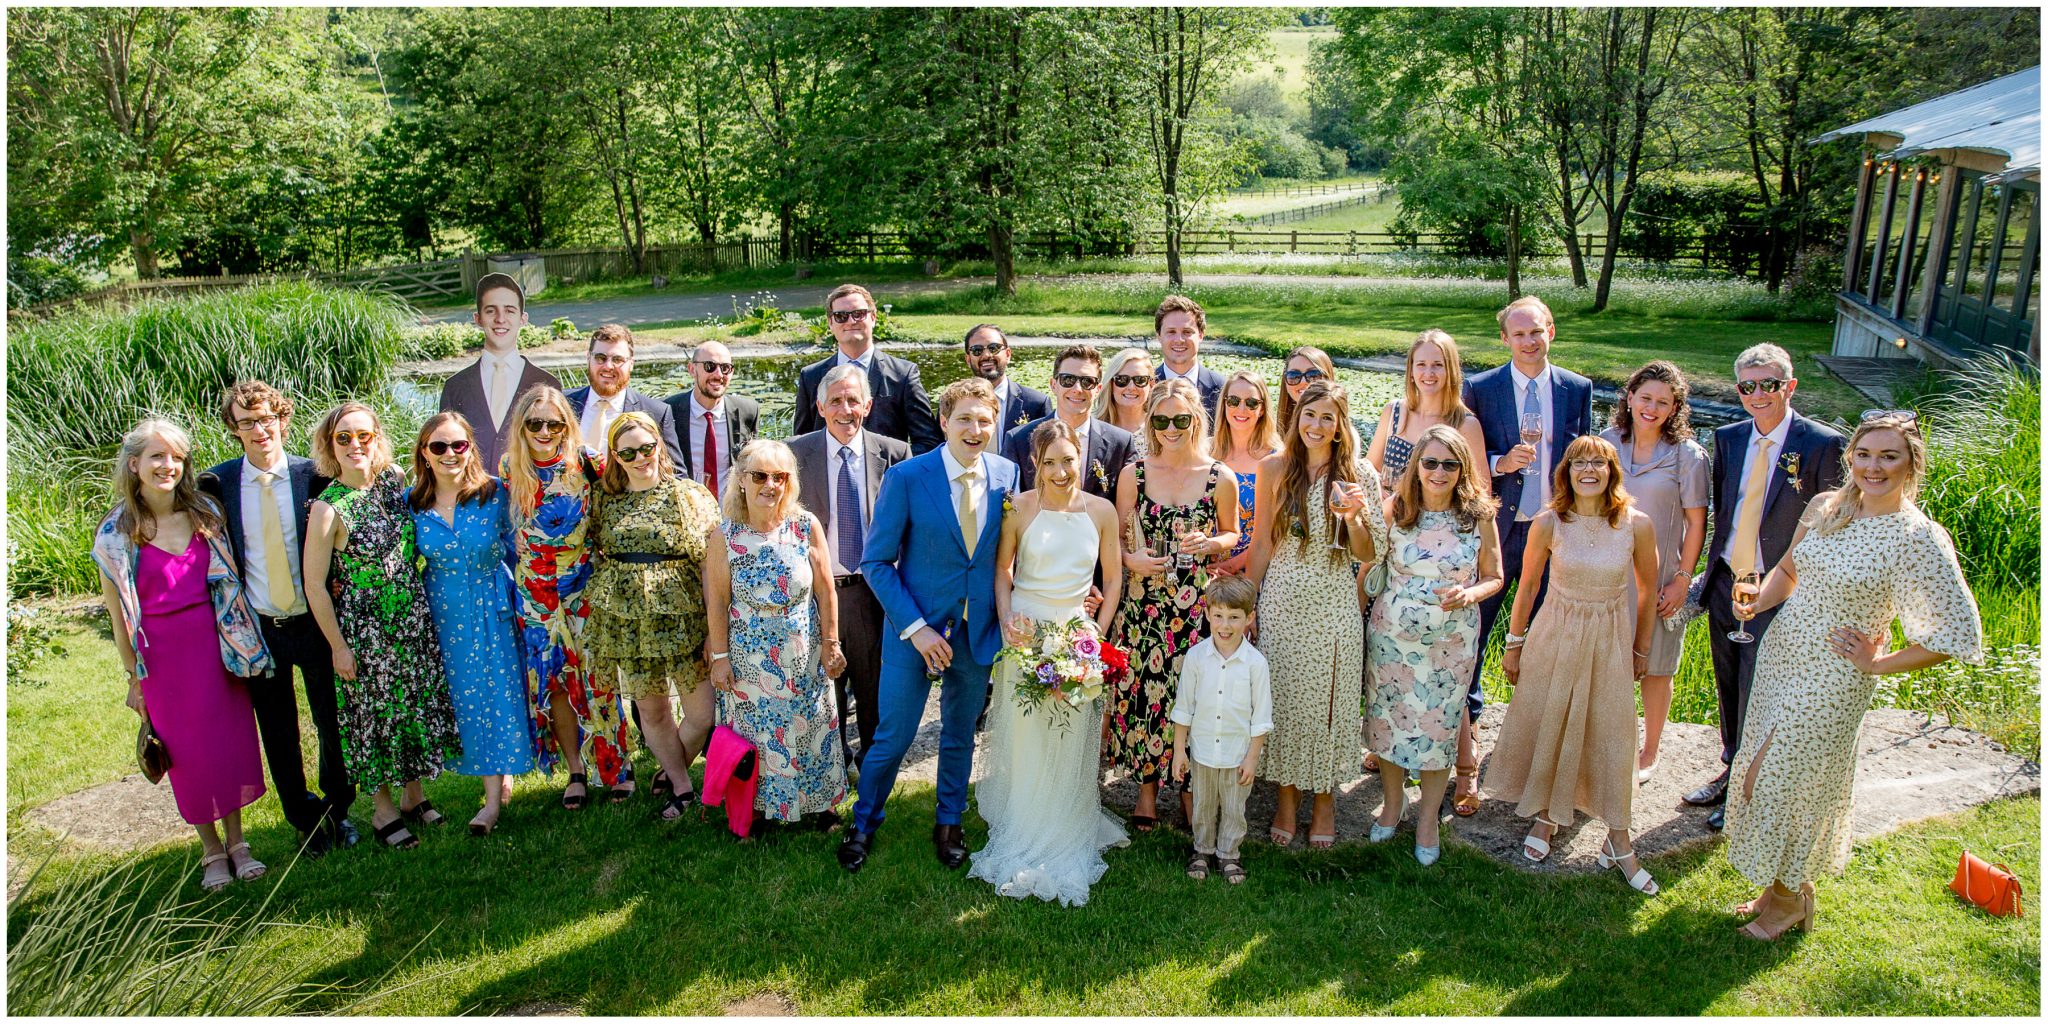 Group photo of all wedding guests in bright sunshine